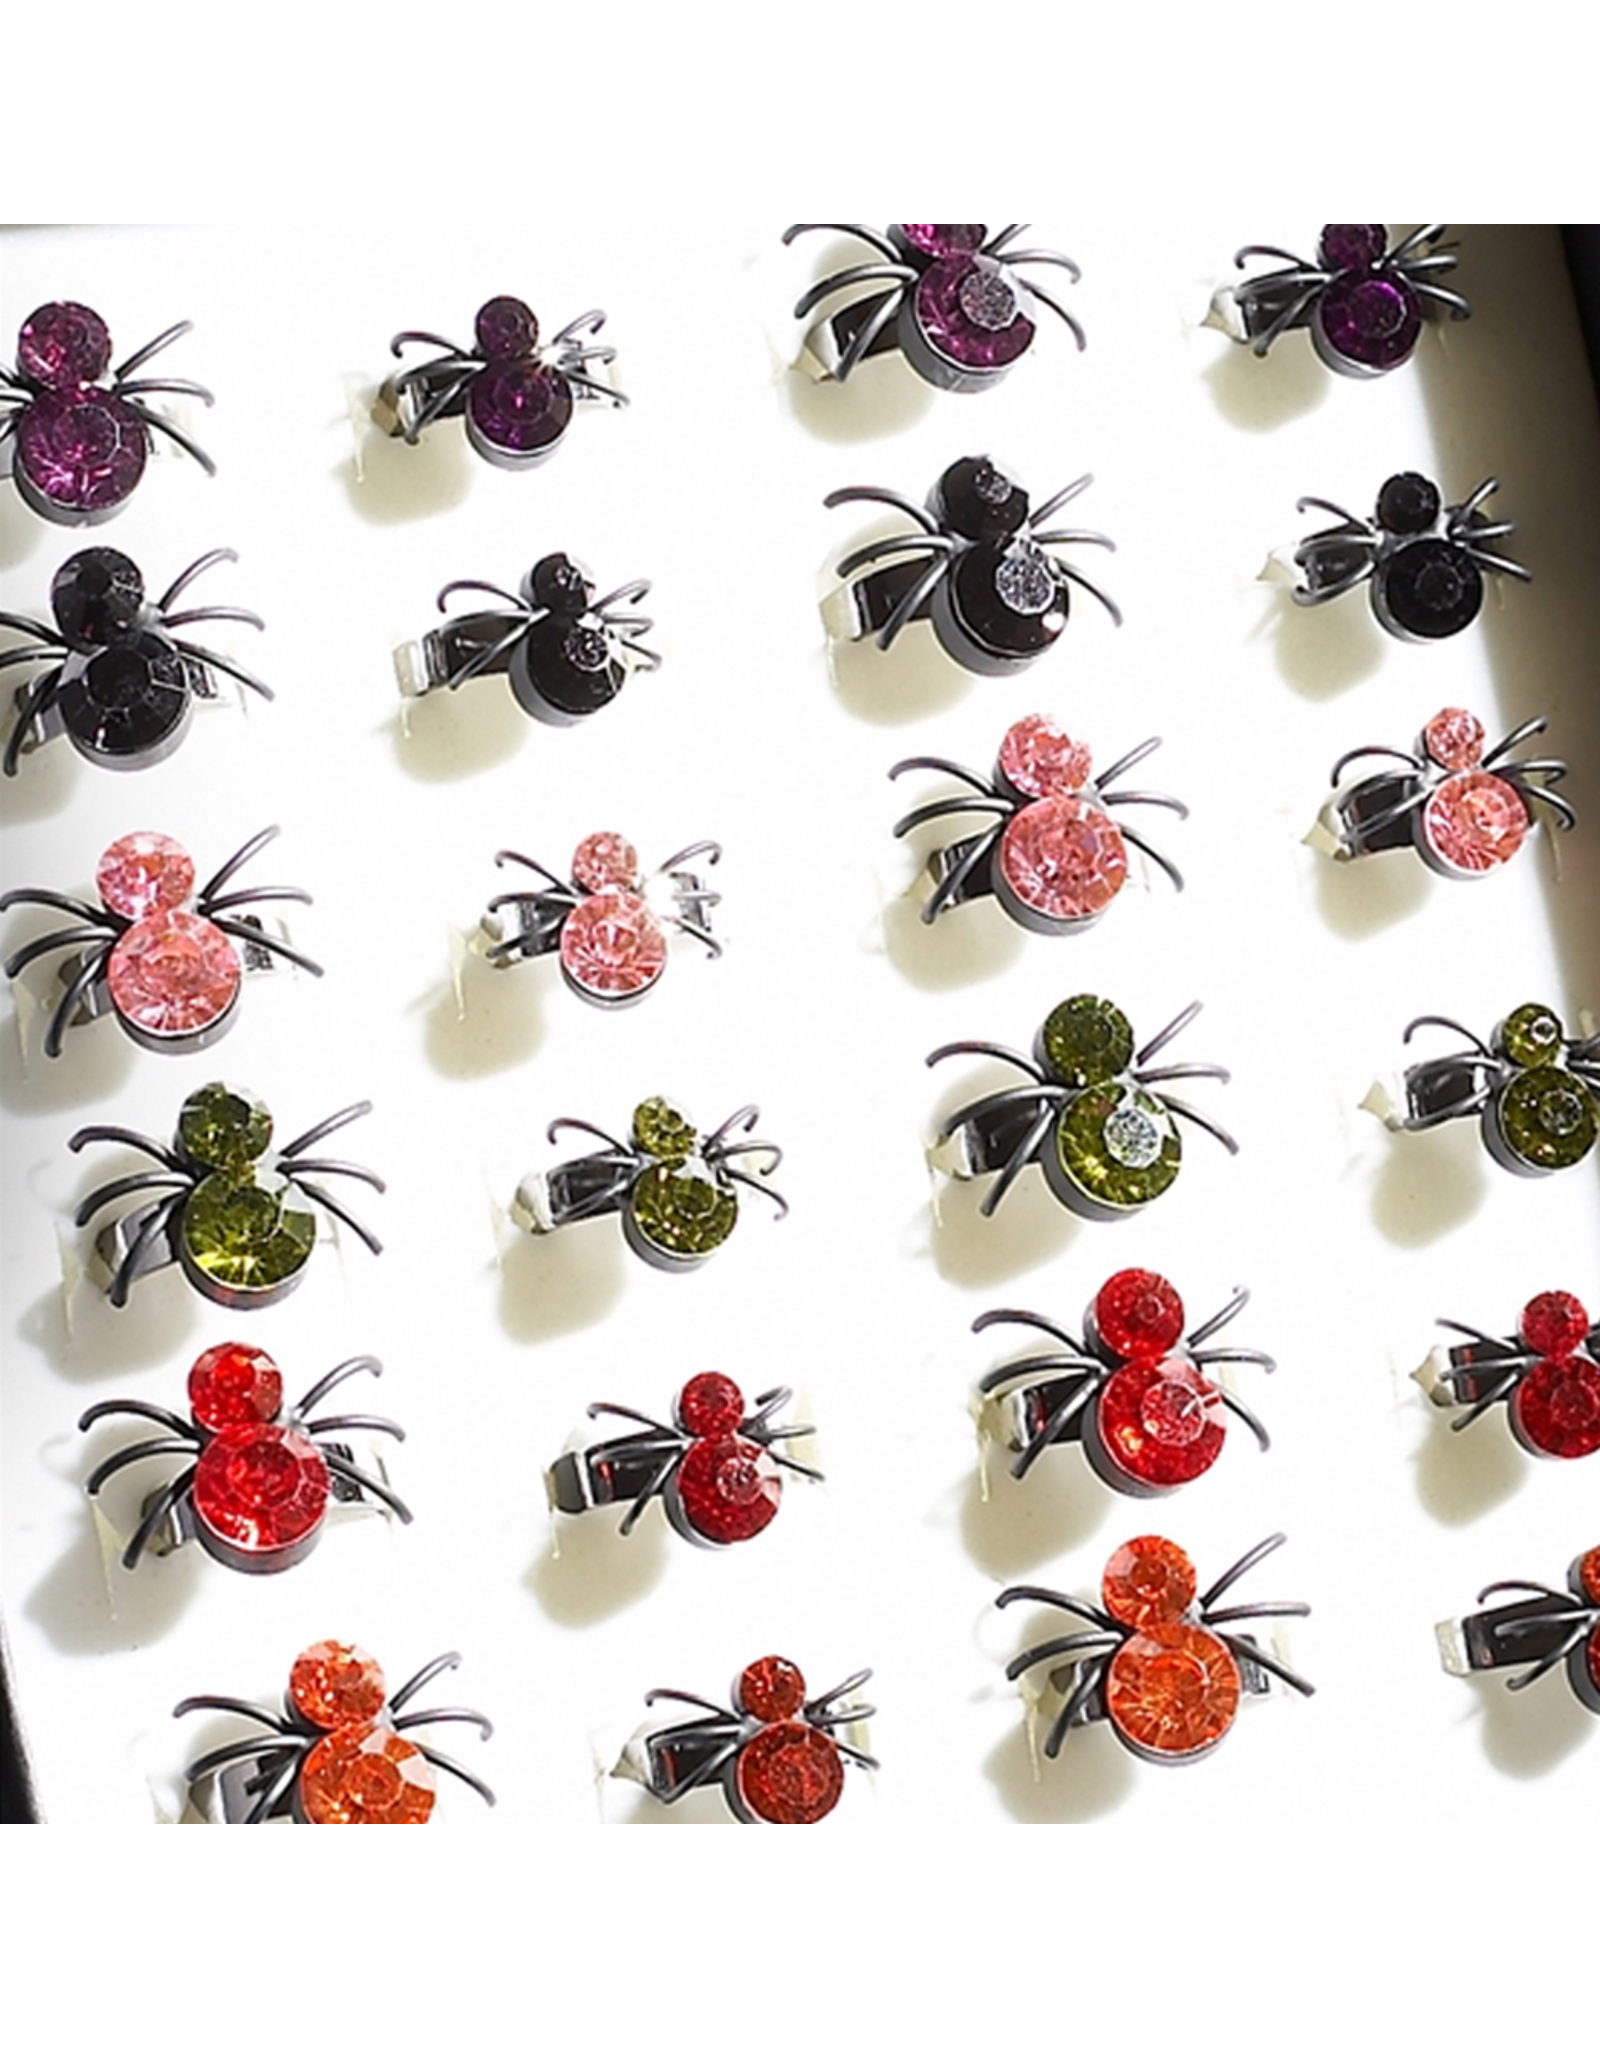 Twos Company Halloween Black Widow Bling Spider Ring .75 inch 0300-L-Pink